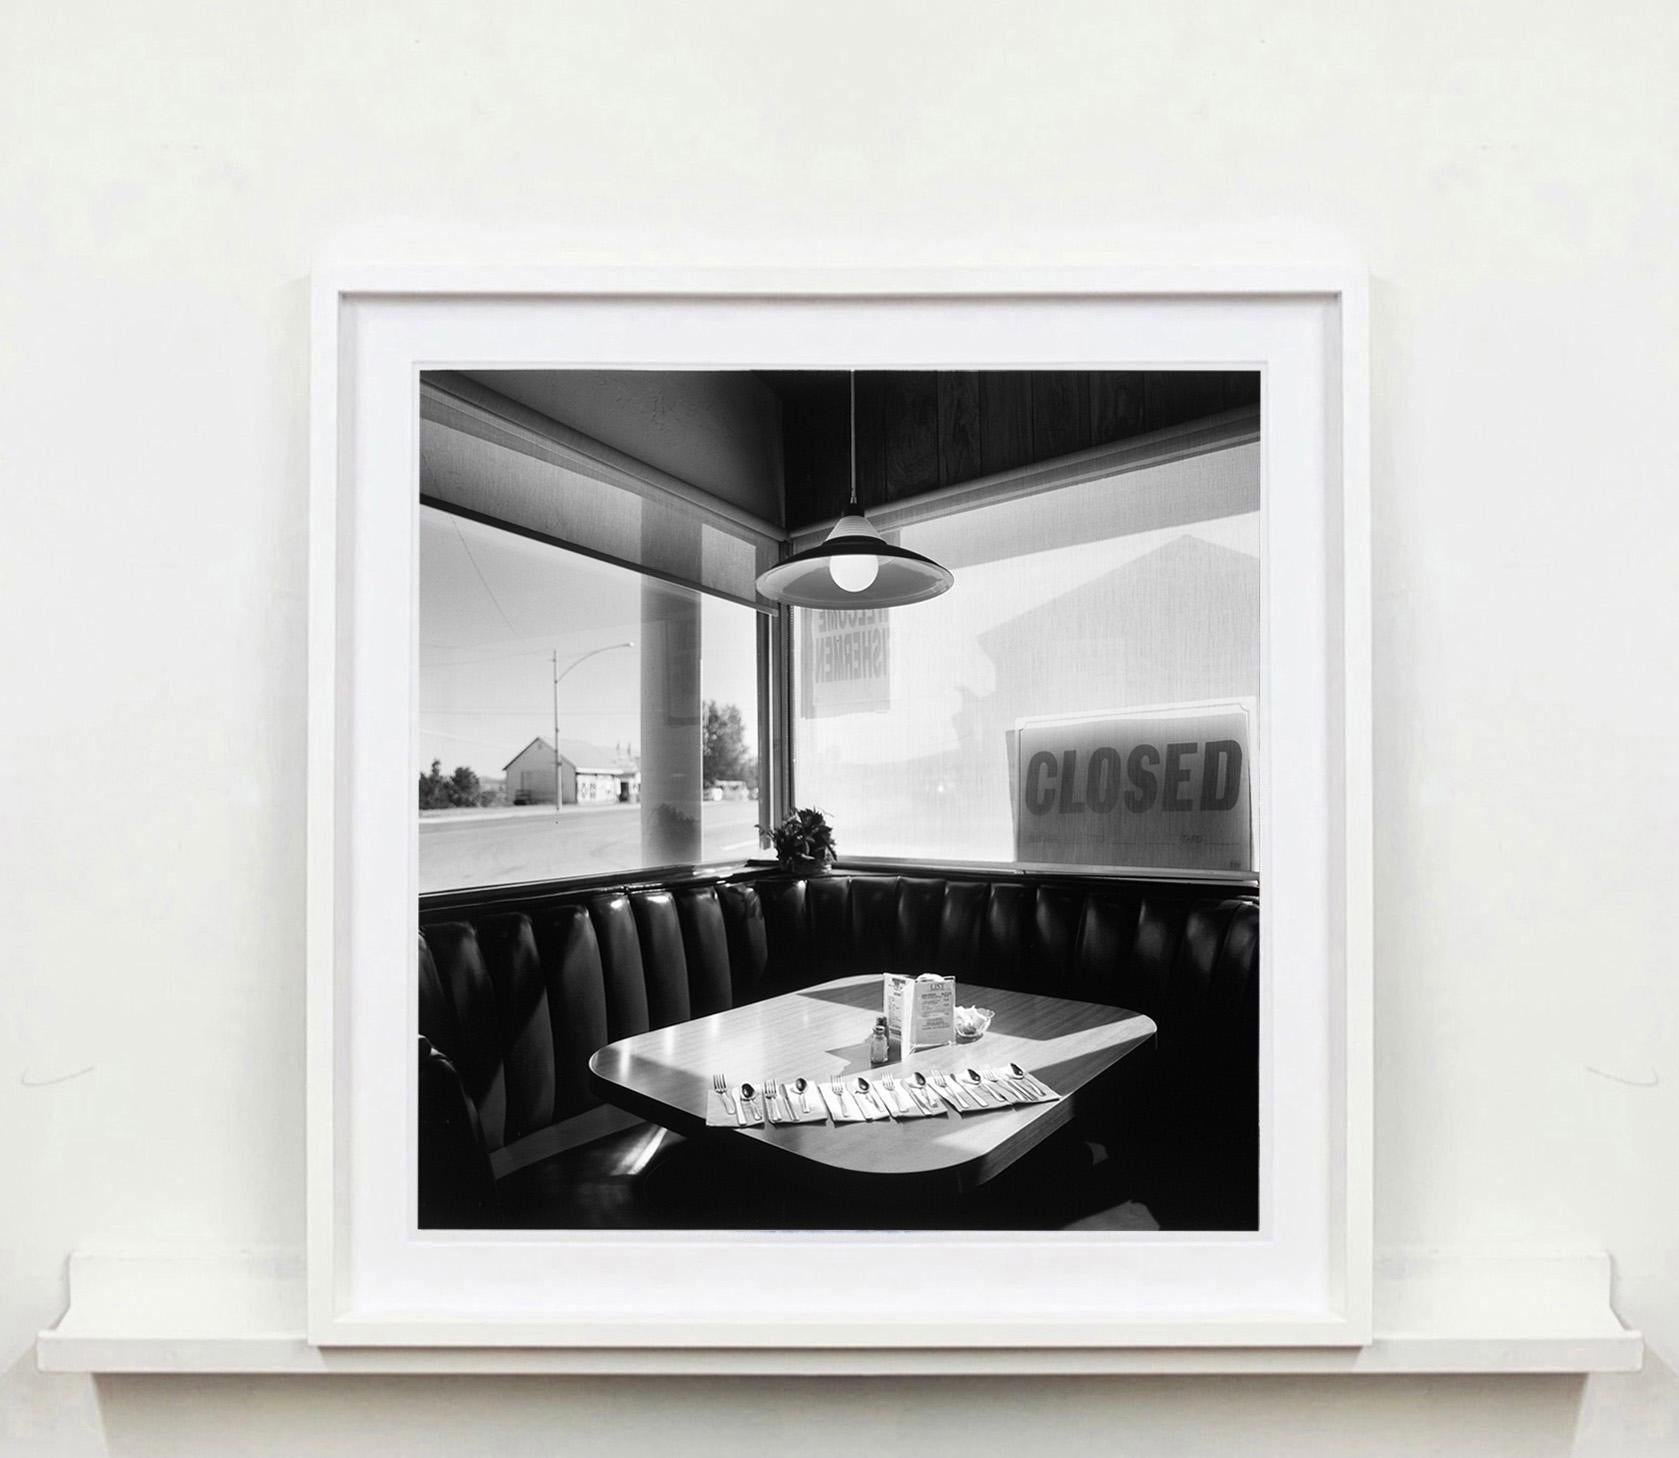 Part of Richard Heeps 'Dream in Colour' Series, 'Nicely's Café' has a vibe of an American road trip, the classic diner interior has a cool cinematic feel.
Primarily known as a color photographer Richard Heeps was commissioned to create this black